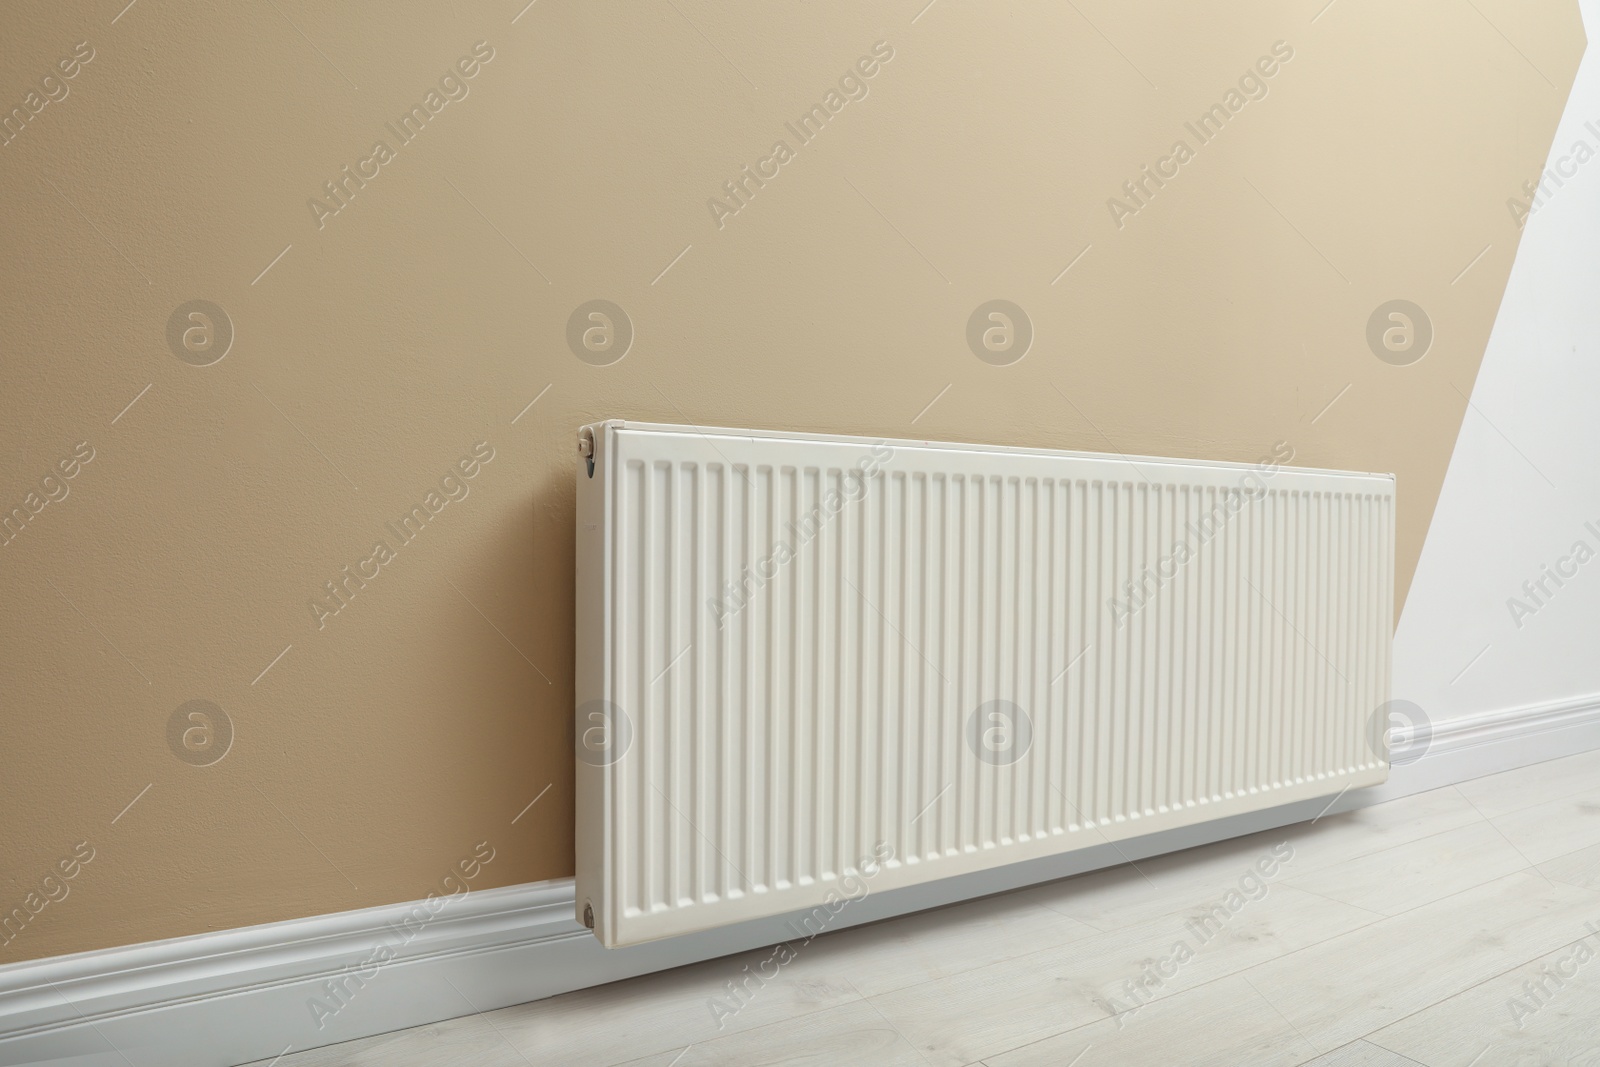 Photo of Modern radiator on beige wall indoors. Central heating system